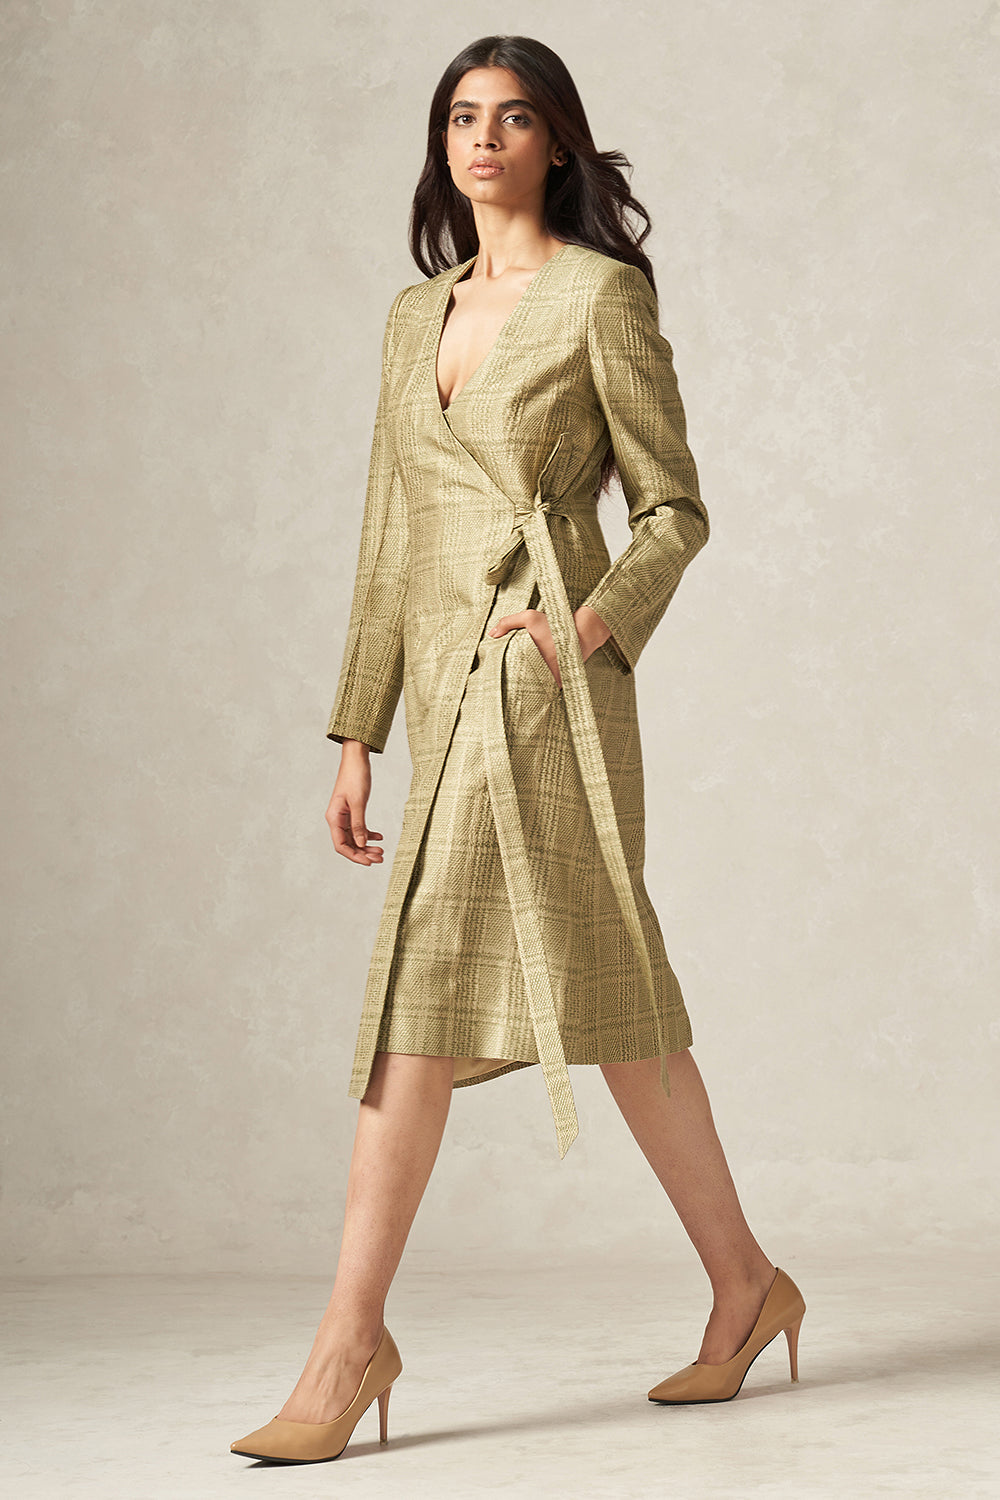 Green and Beige Handwoven Pure Silk Plaid Patterned Wrap Dress with Side Tie-up